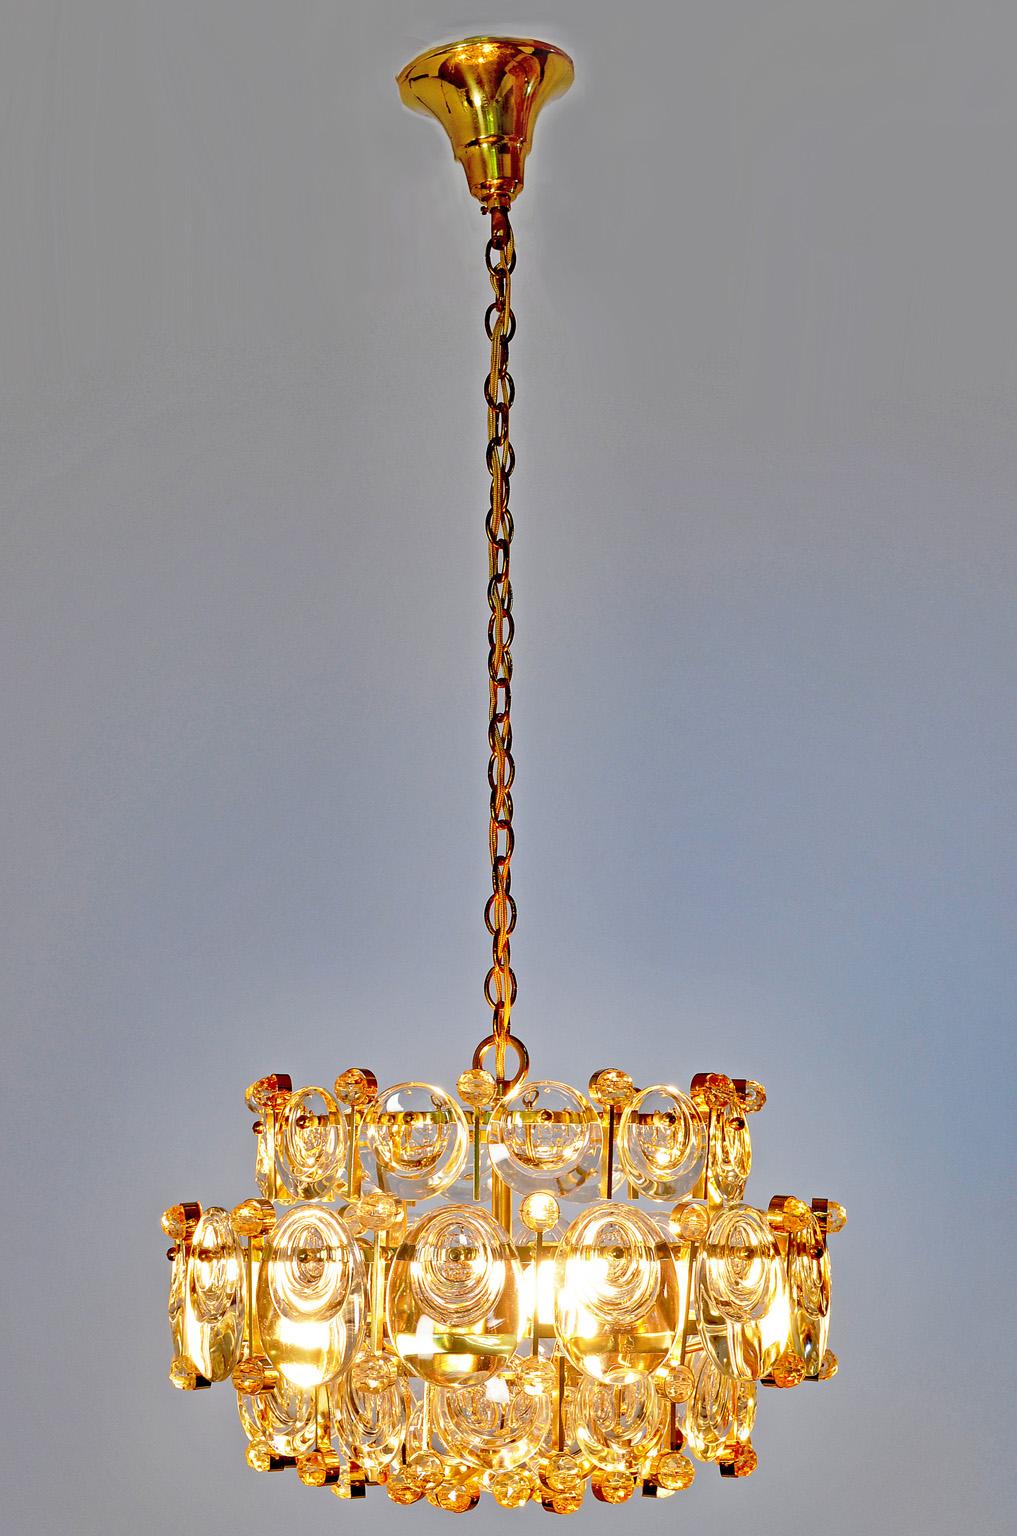 This chandelier is made of gilded brass and crystal glass.
It is labeled by Palwa, who produced the lamp in the 1960s.